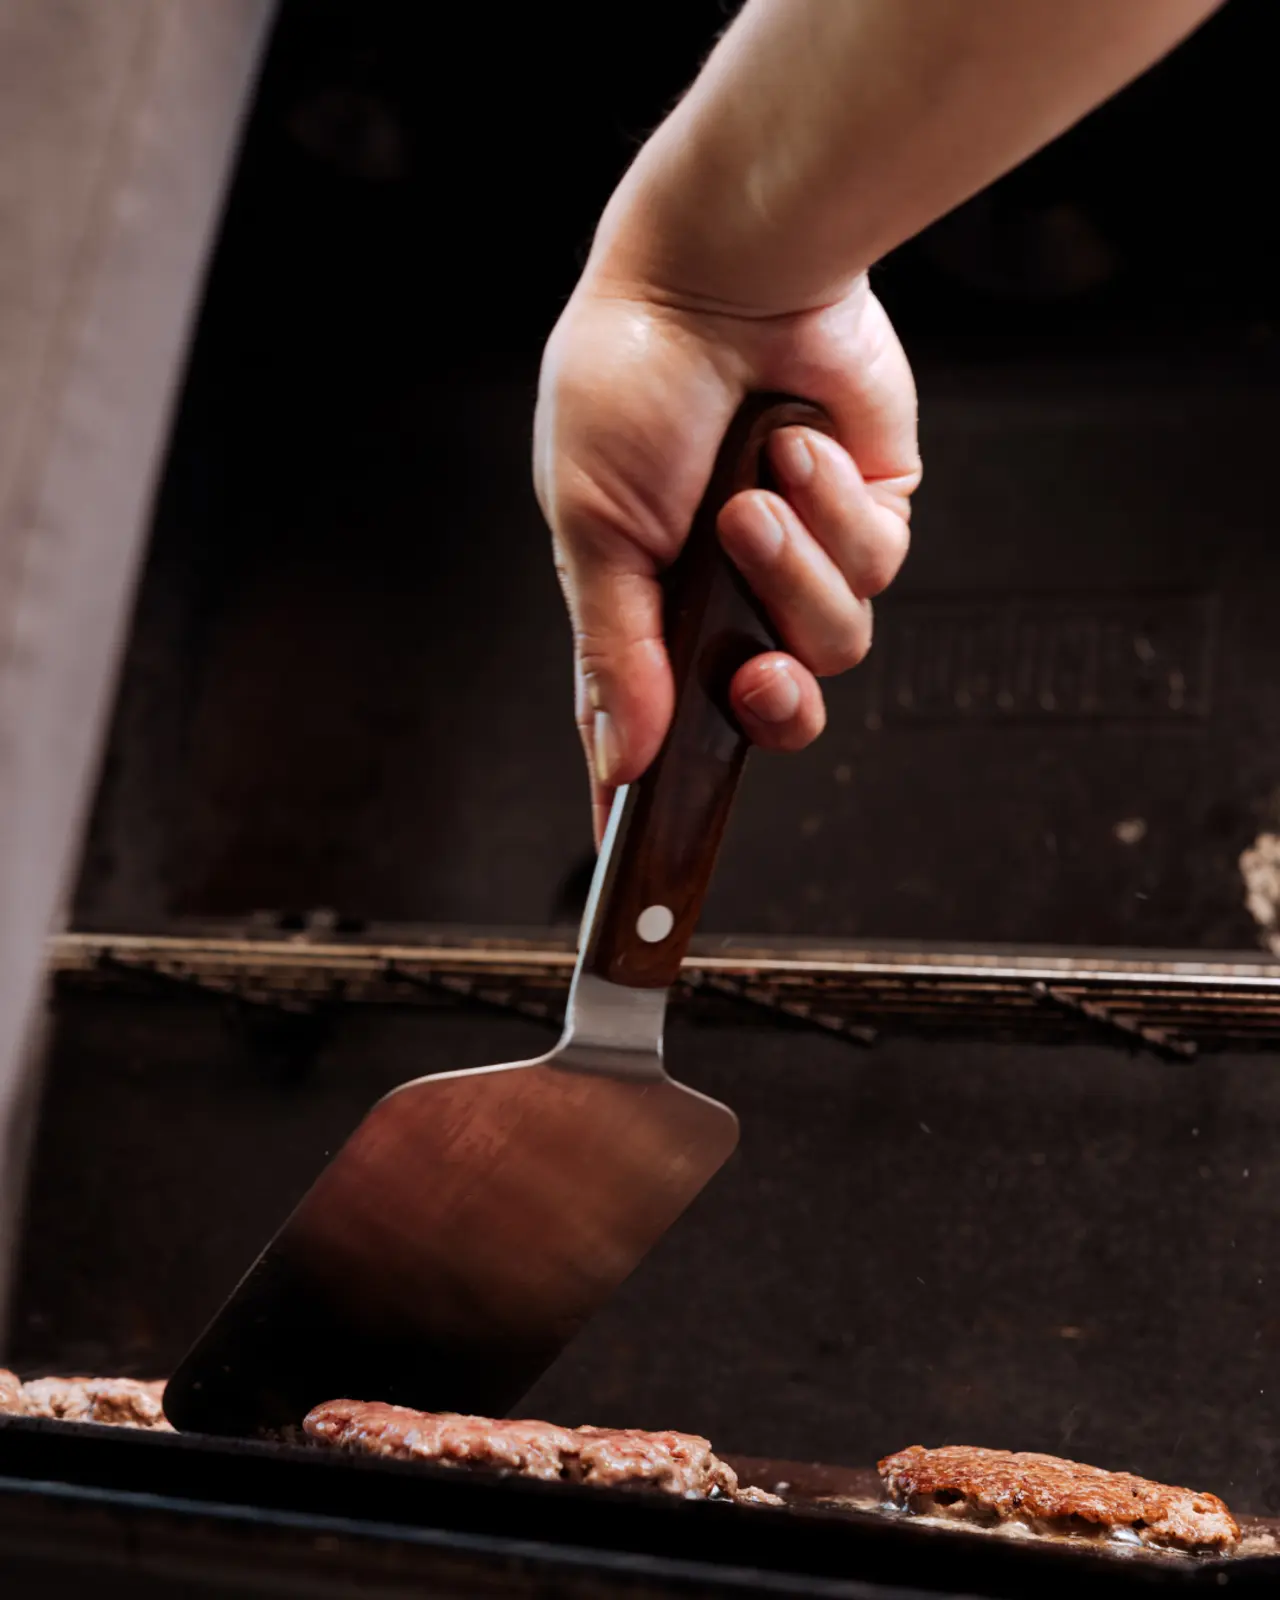 A person's hand is flipping burgers on a grill with a metal spatula.